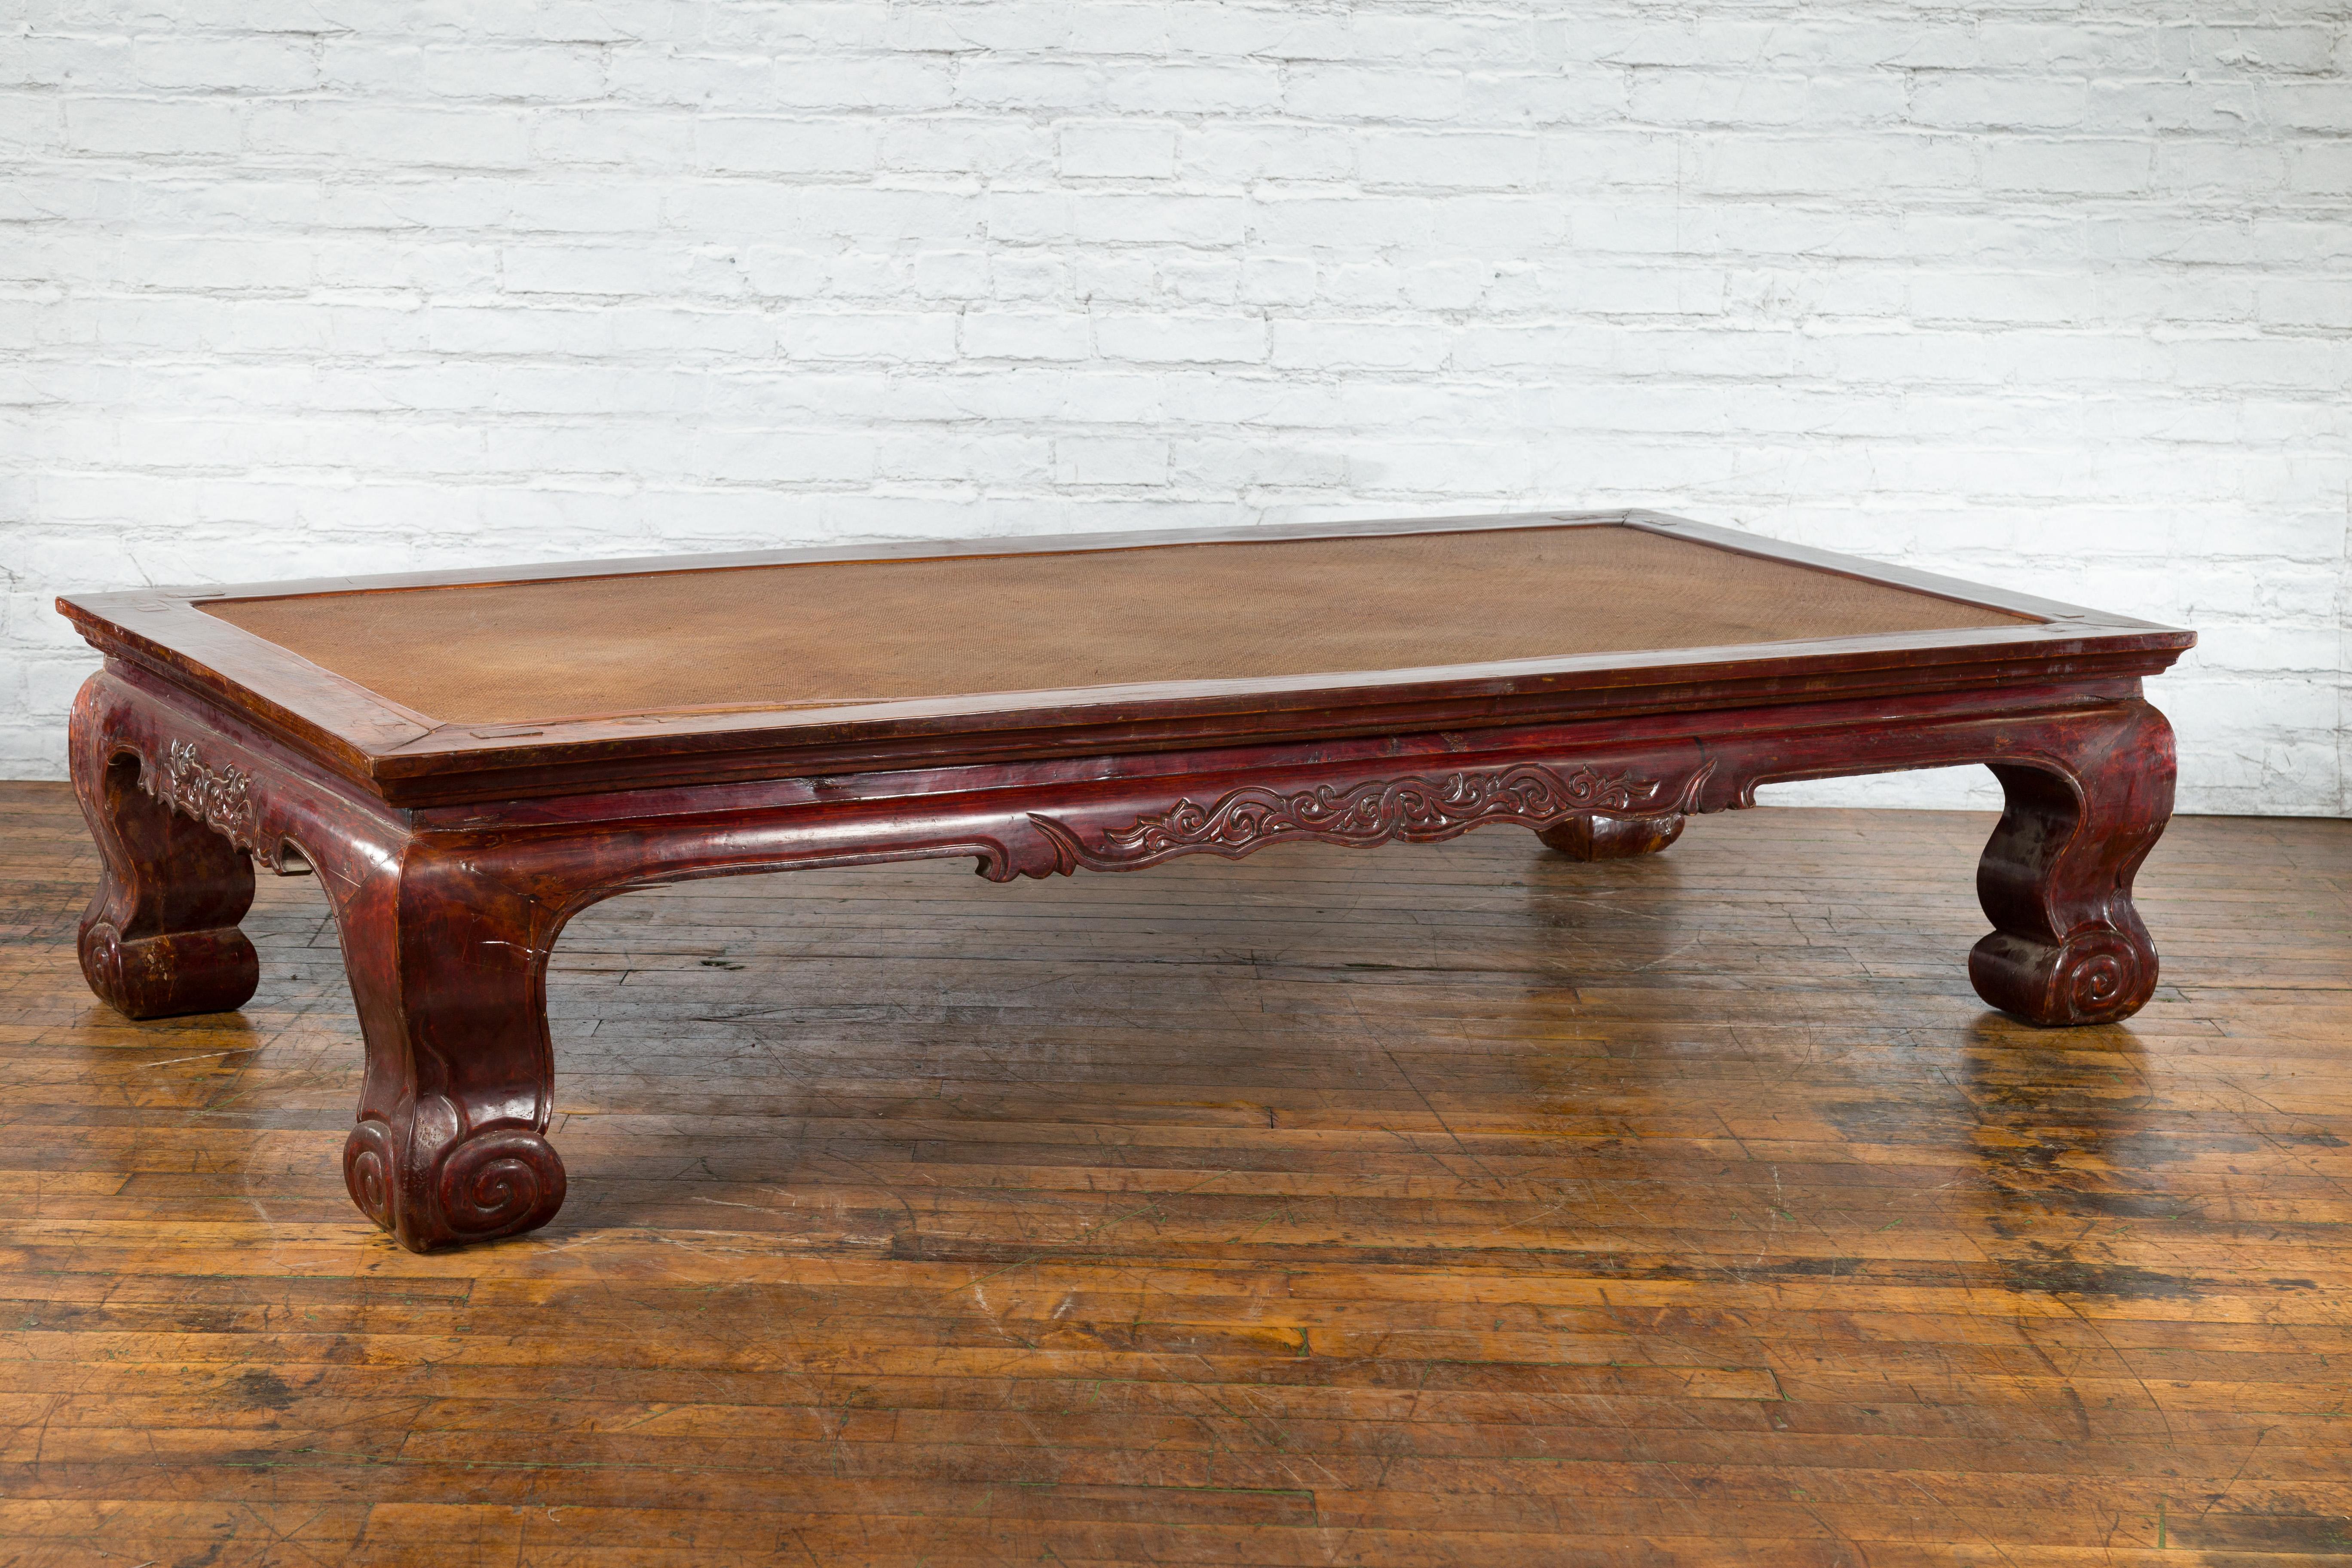 Chinese Qing Dynasty 19th Century Mahogany Stained Coffee Table with Rattan Top For Sale 8